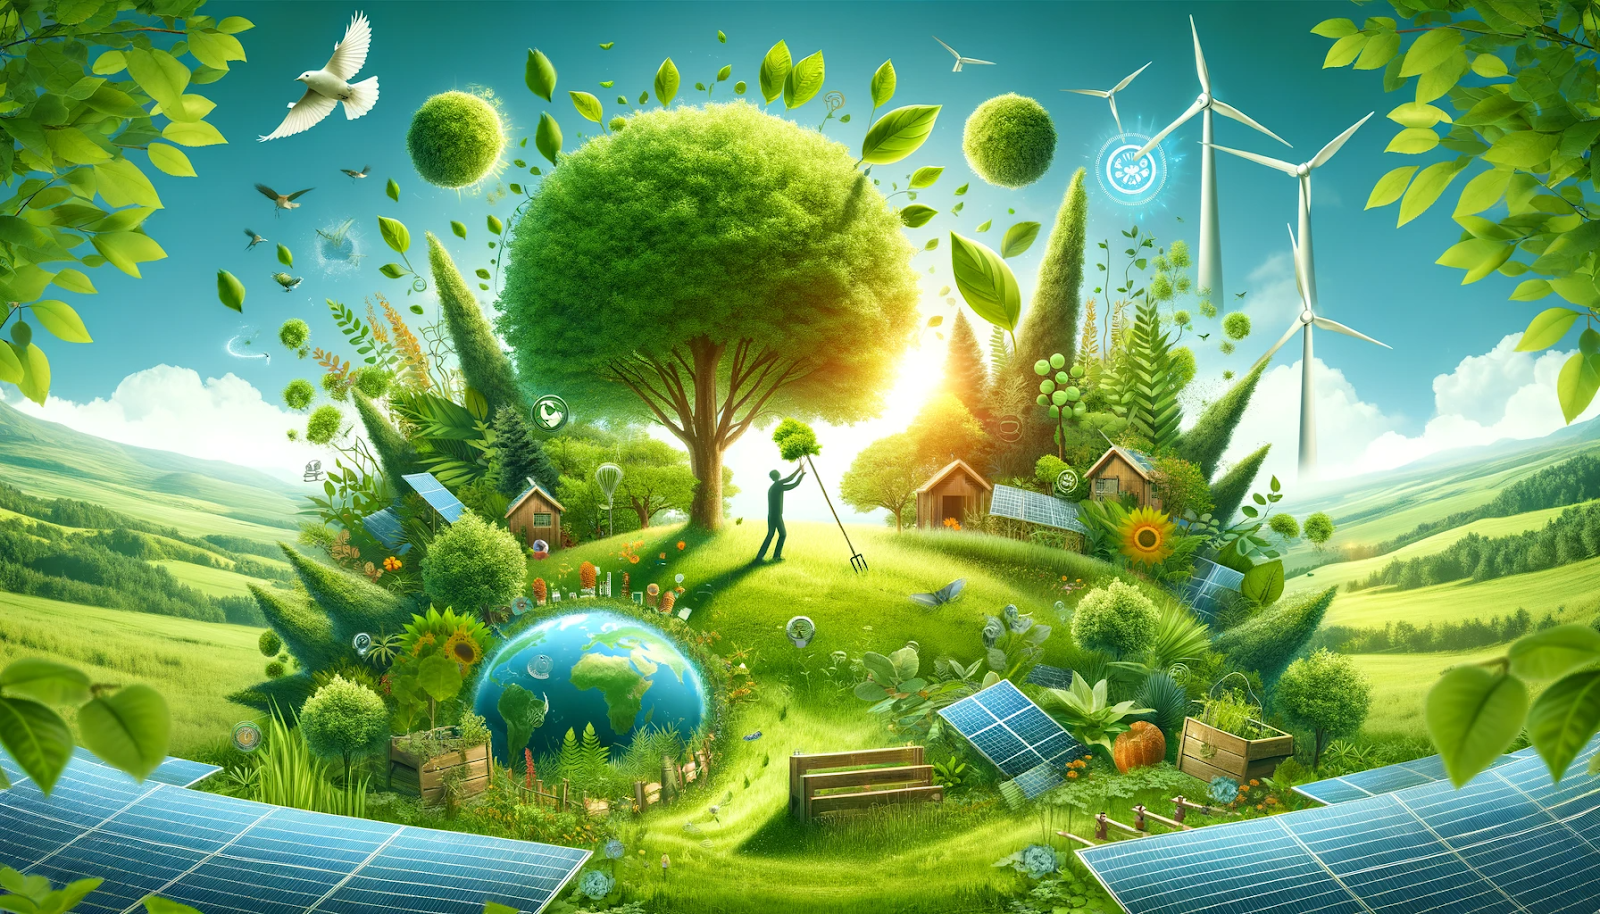 Environmental friendliness and responsibility